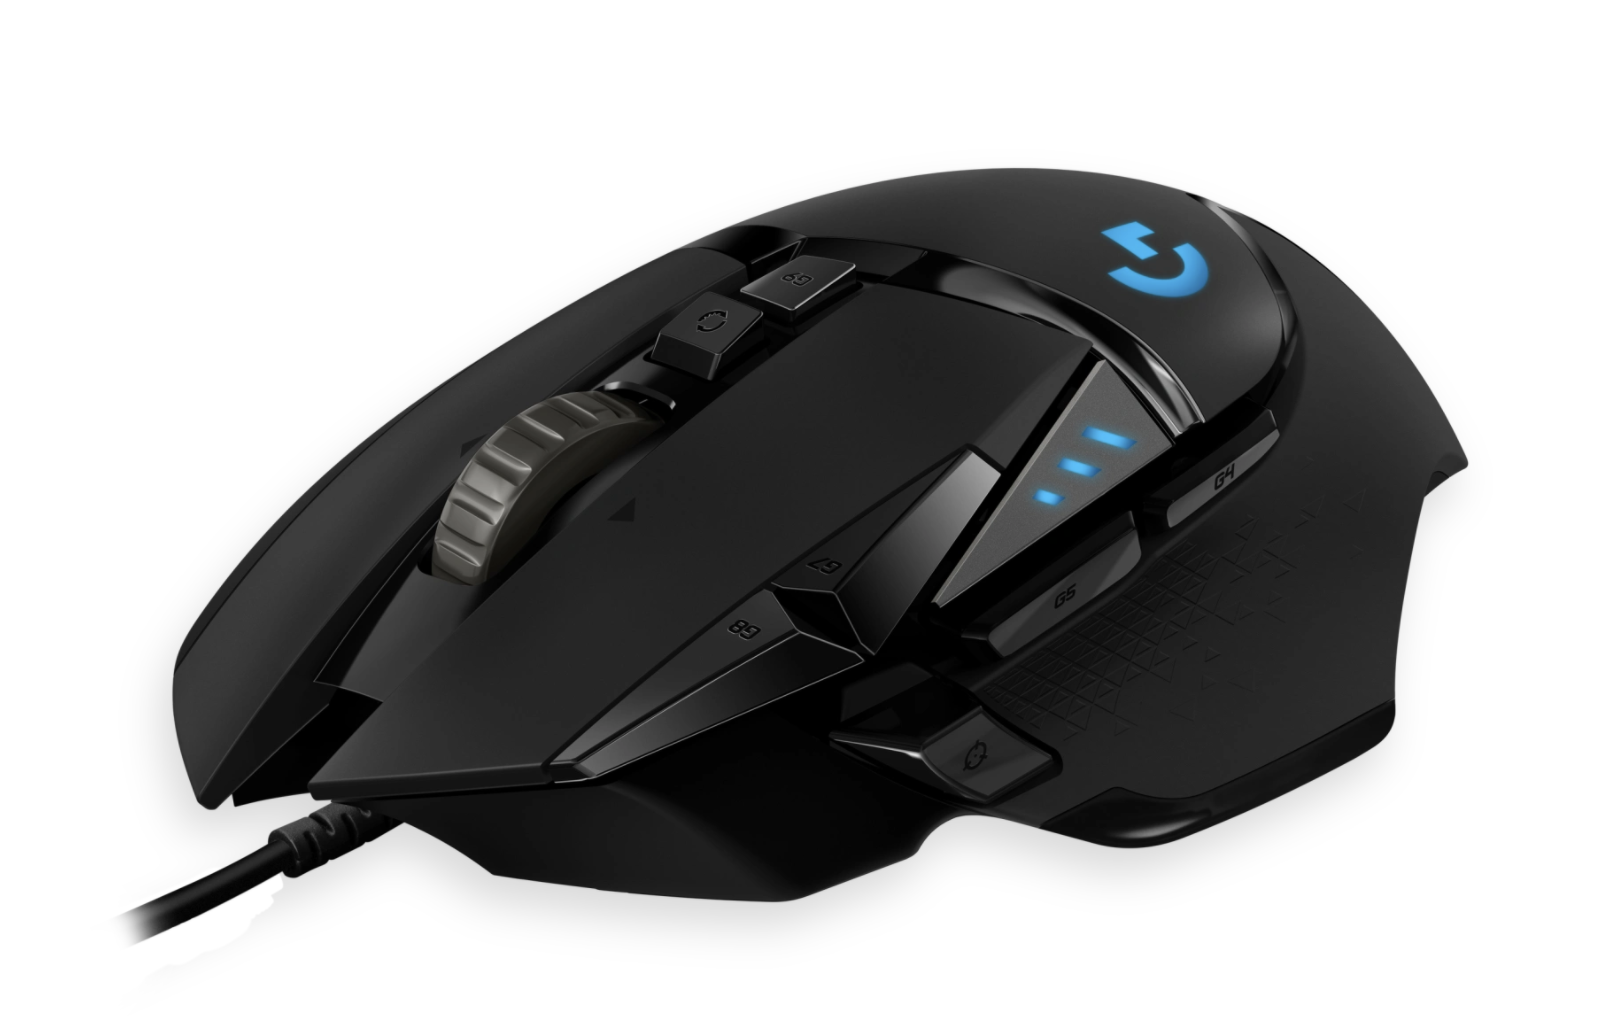 The Logitech G502 wireless gaming mouse